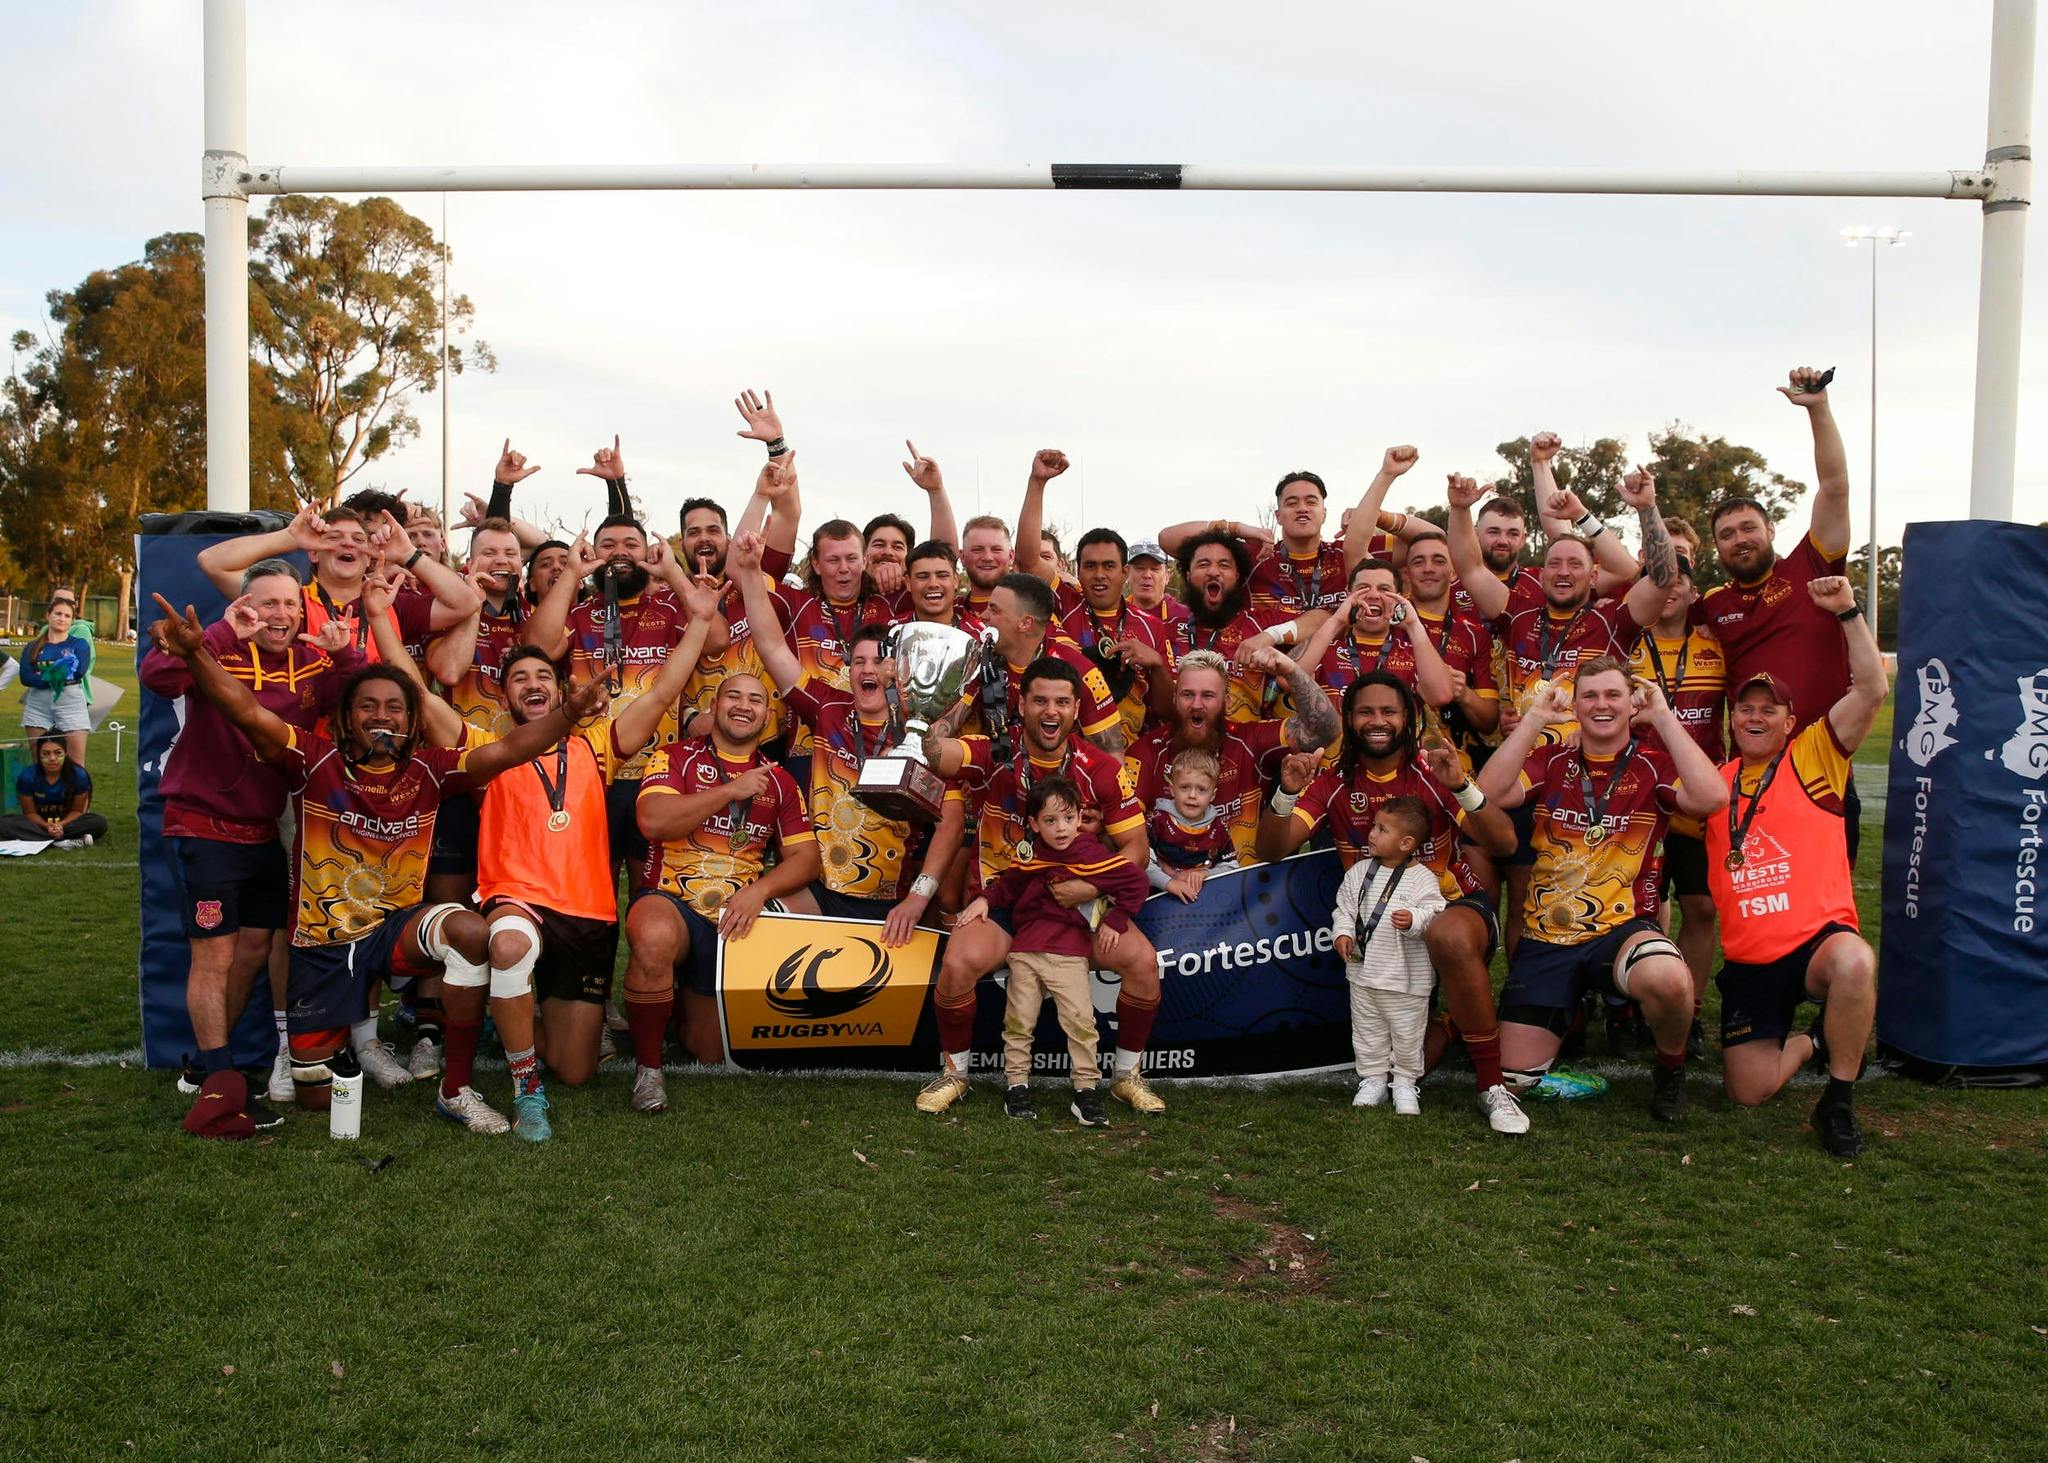 Wests Scarborough are the 2022 Fortescue Premier Grade Winners! (Source: RugbyWA)